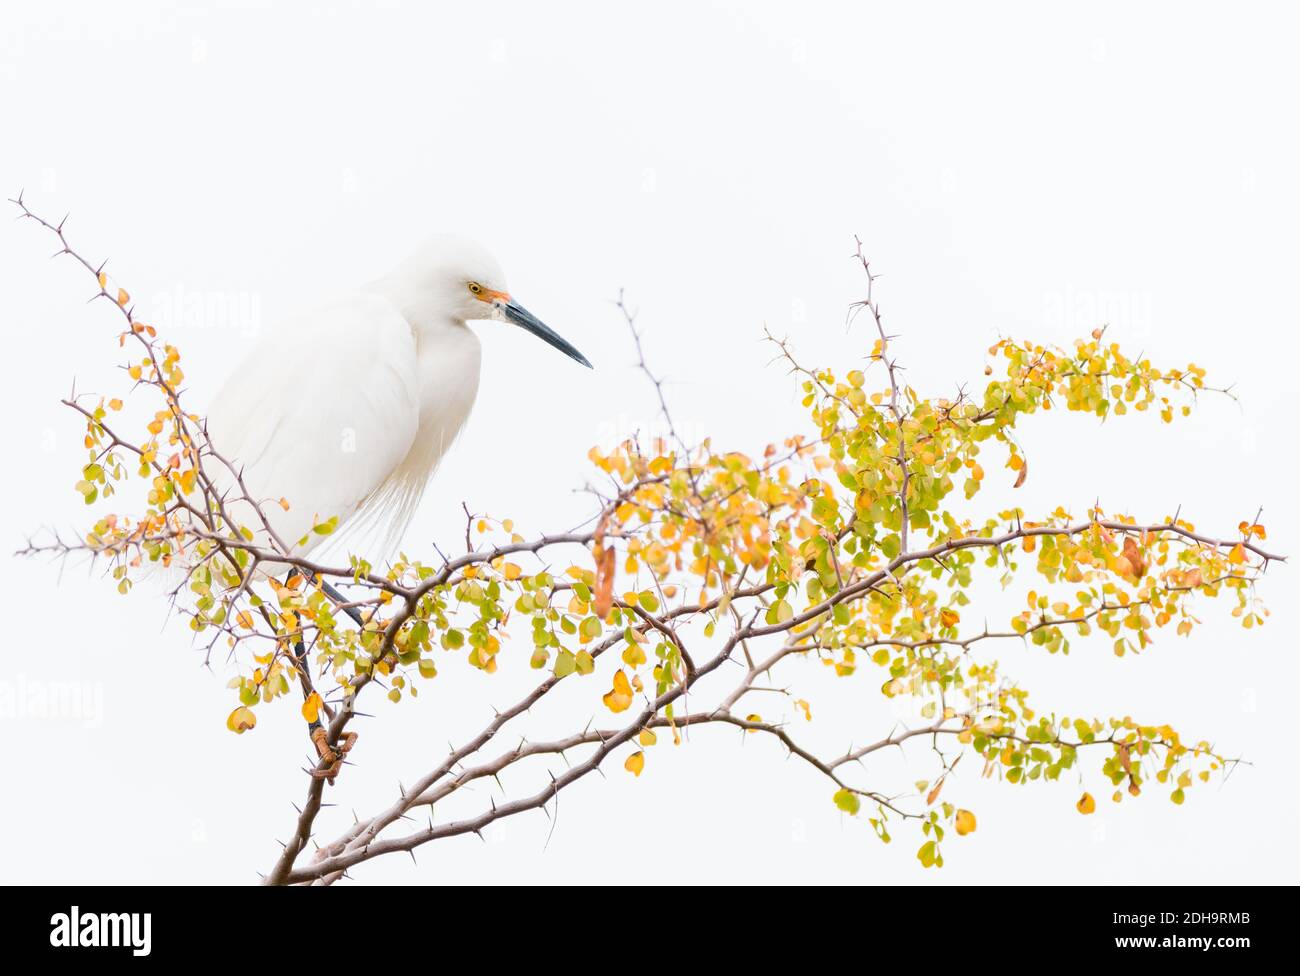 A snowy egret sits patiently at the top of a treetop with awareness and patience, in a simple composition with a white background. Stock Photo